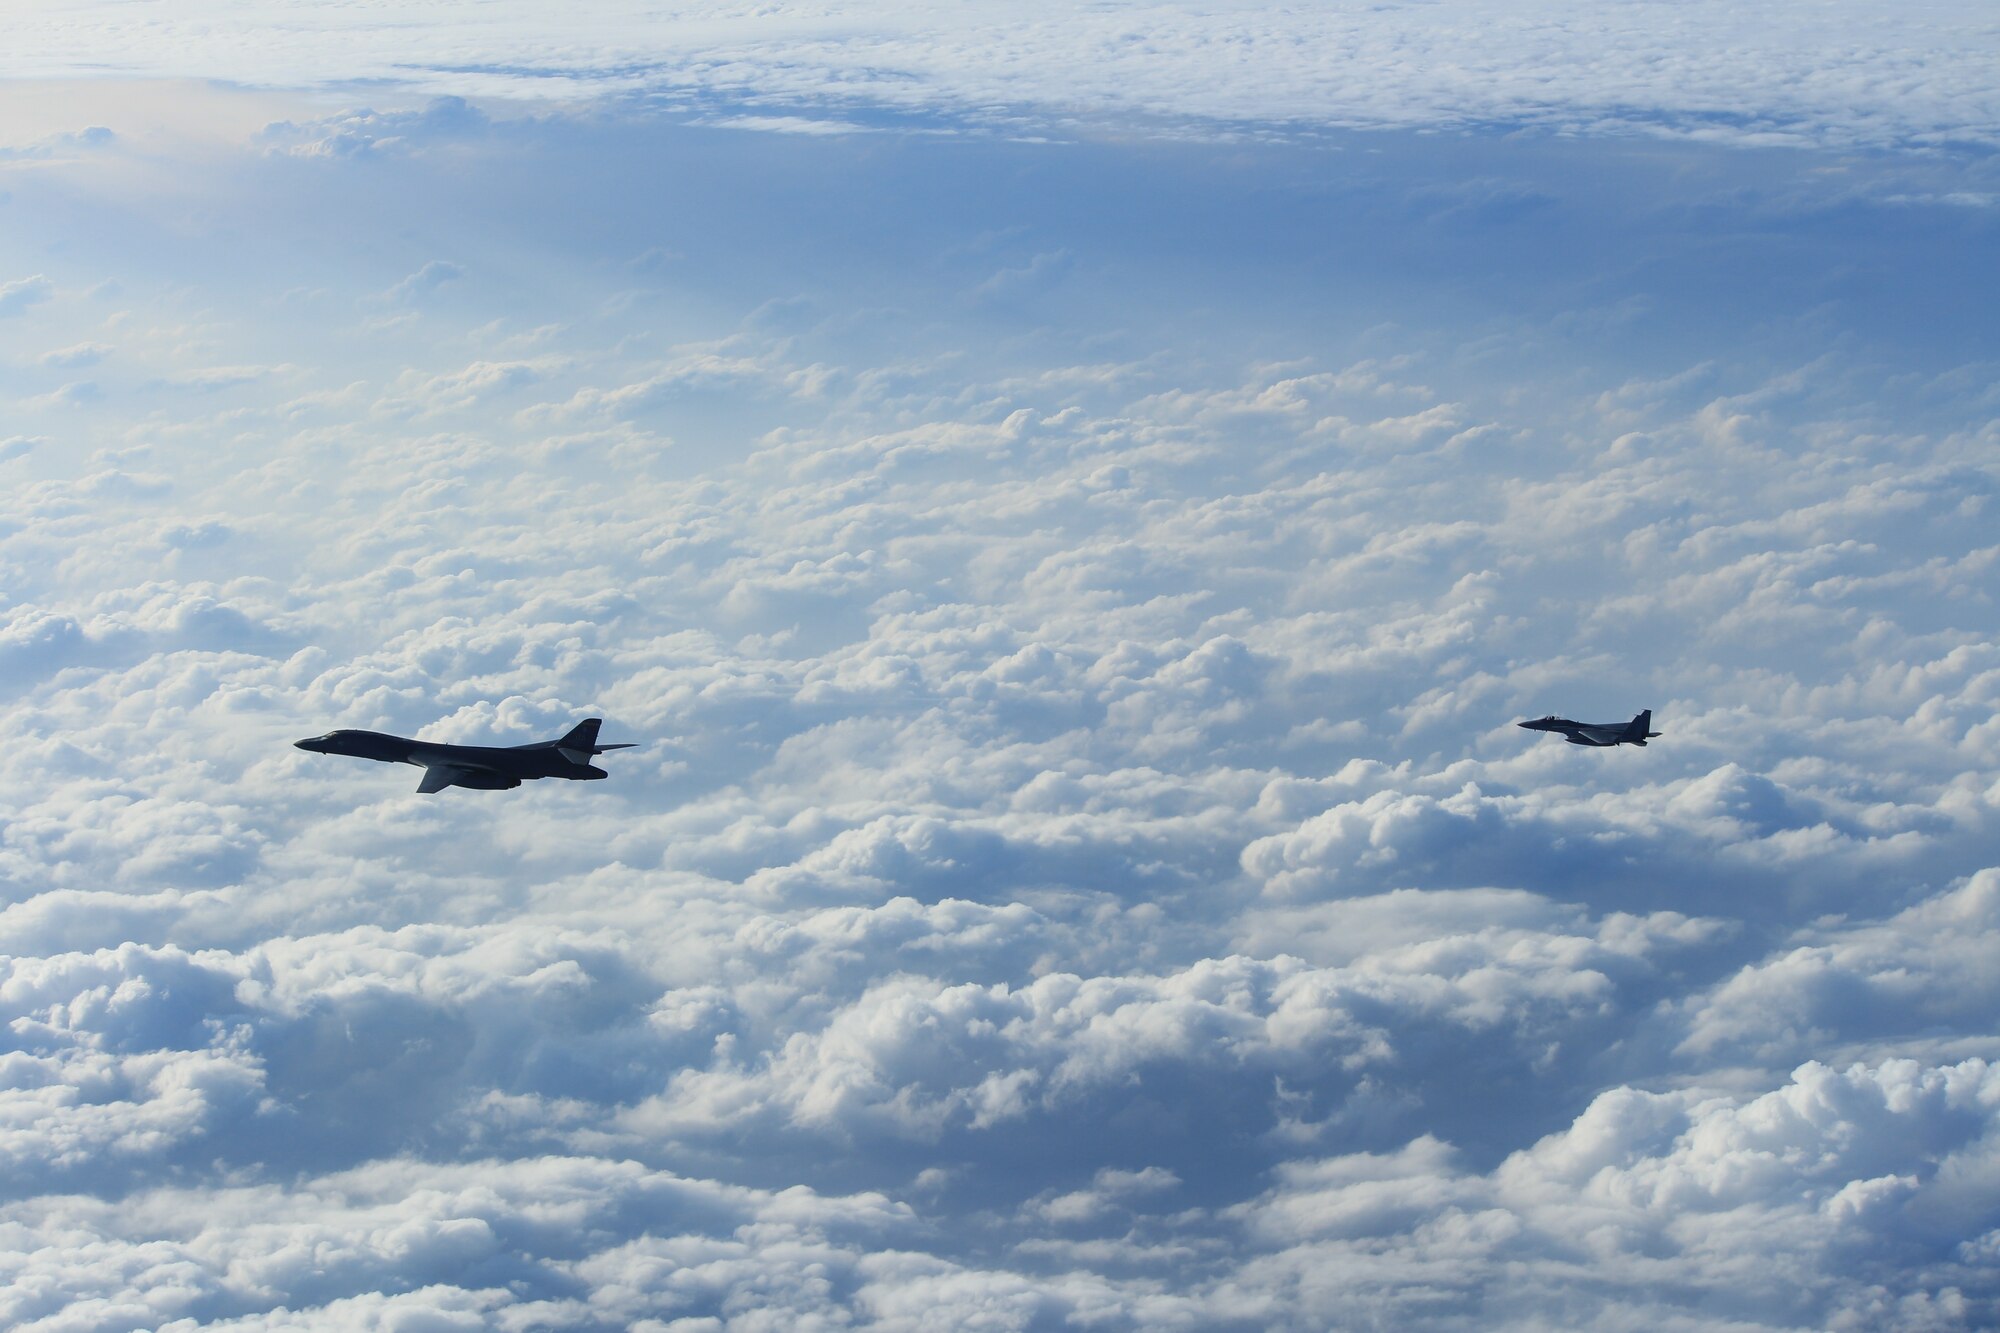 A B-1B Lancer, assigned to the 9th Expeditionary Bomb Squadron, Dyess Air Force Base, Texas, conducts training with a Koku-Jieitai (Japan Air Self Defense Force) F-15 fighter in the vicinity of the Sea of Japan, October 20, 2020.